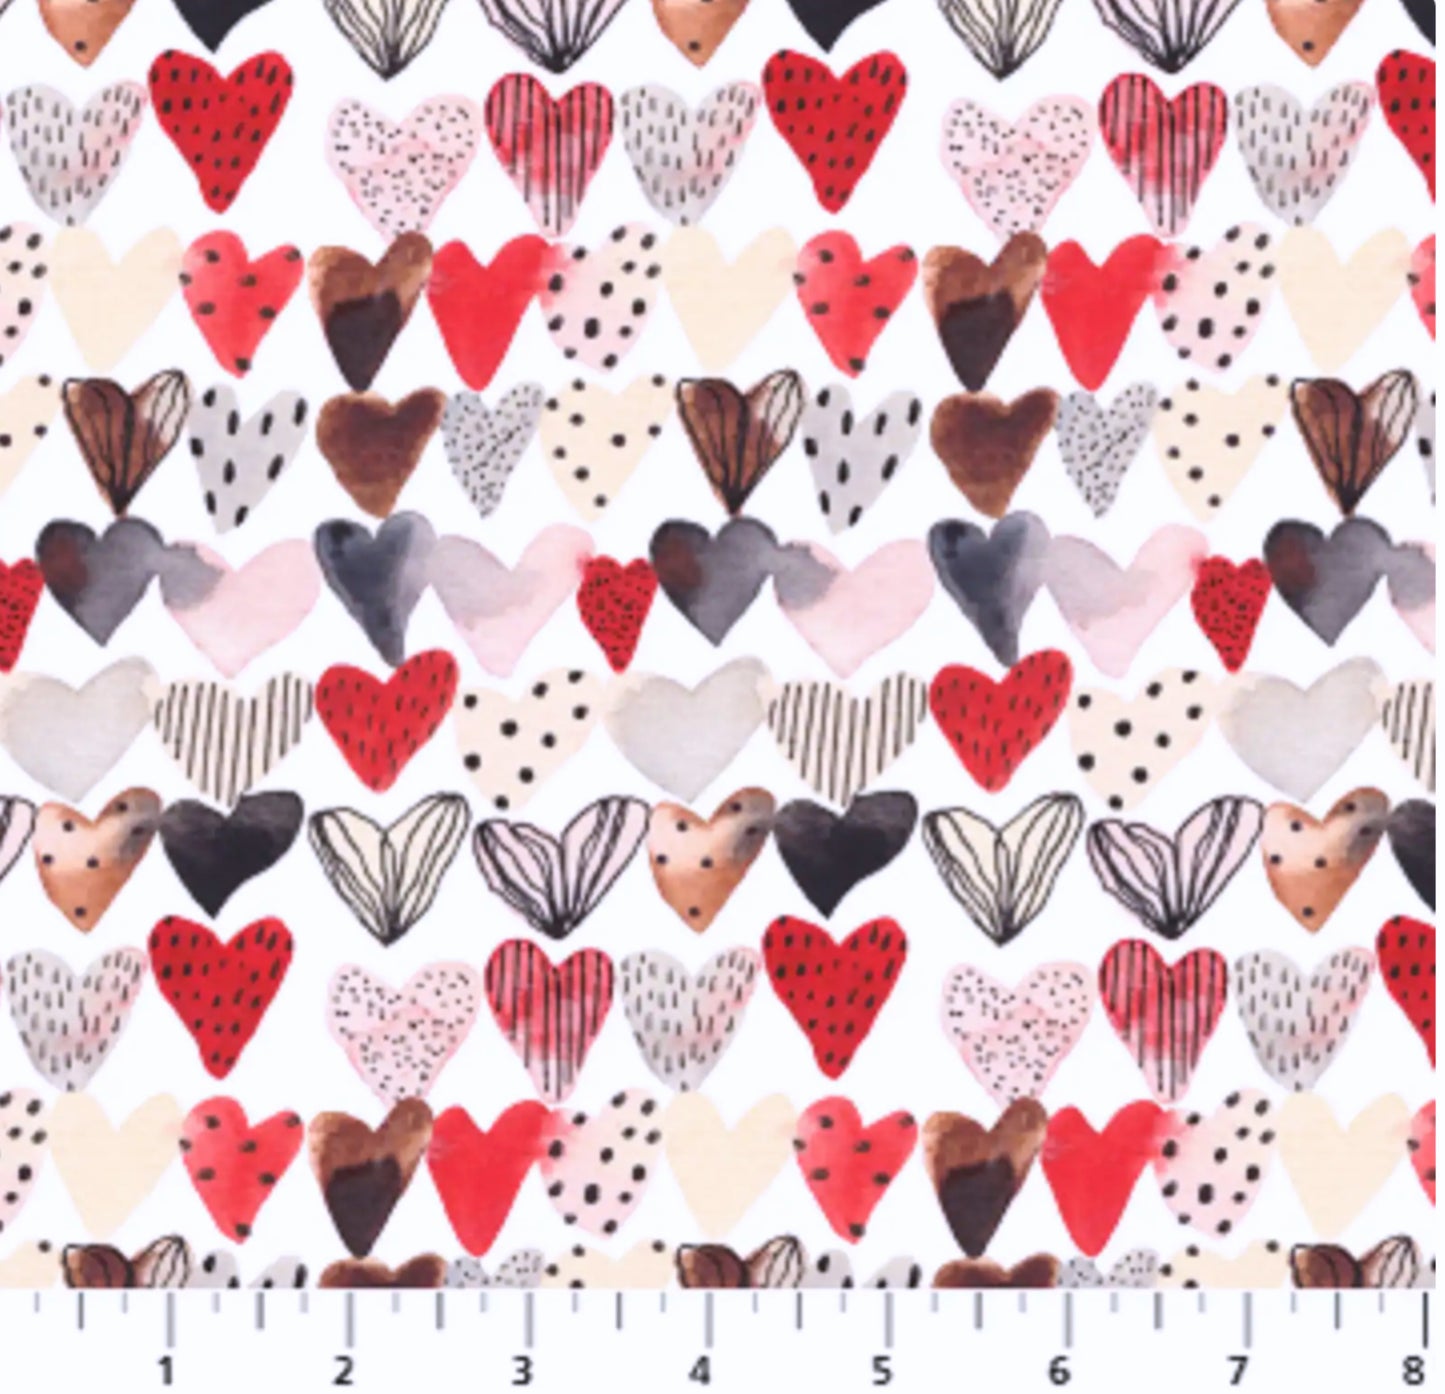 Hearts - 90487-10 - Roses are Red Collection - Figo Fabrics